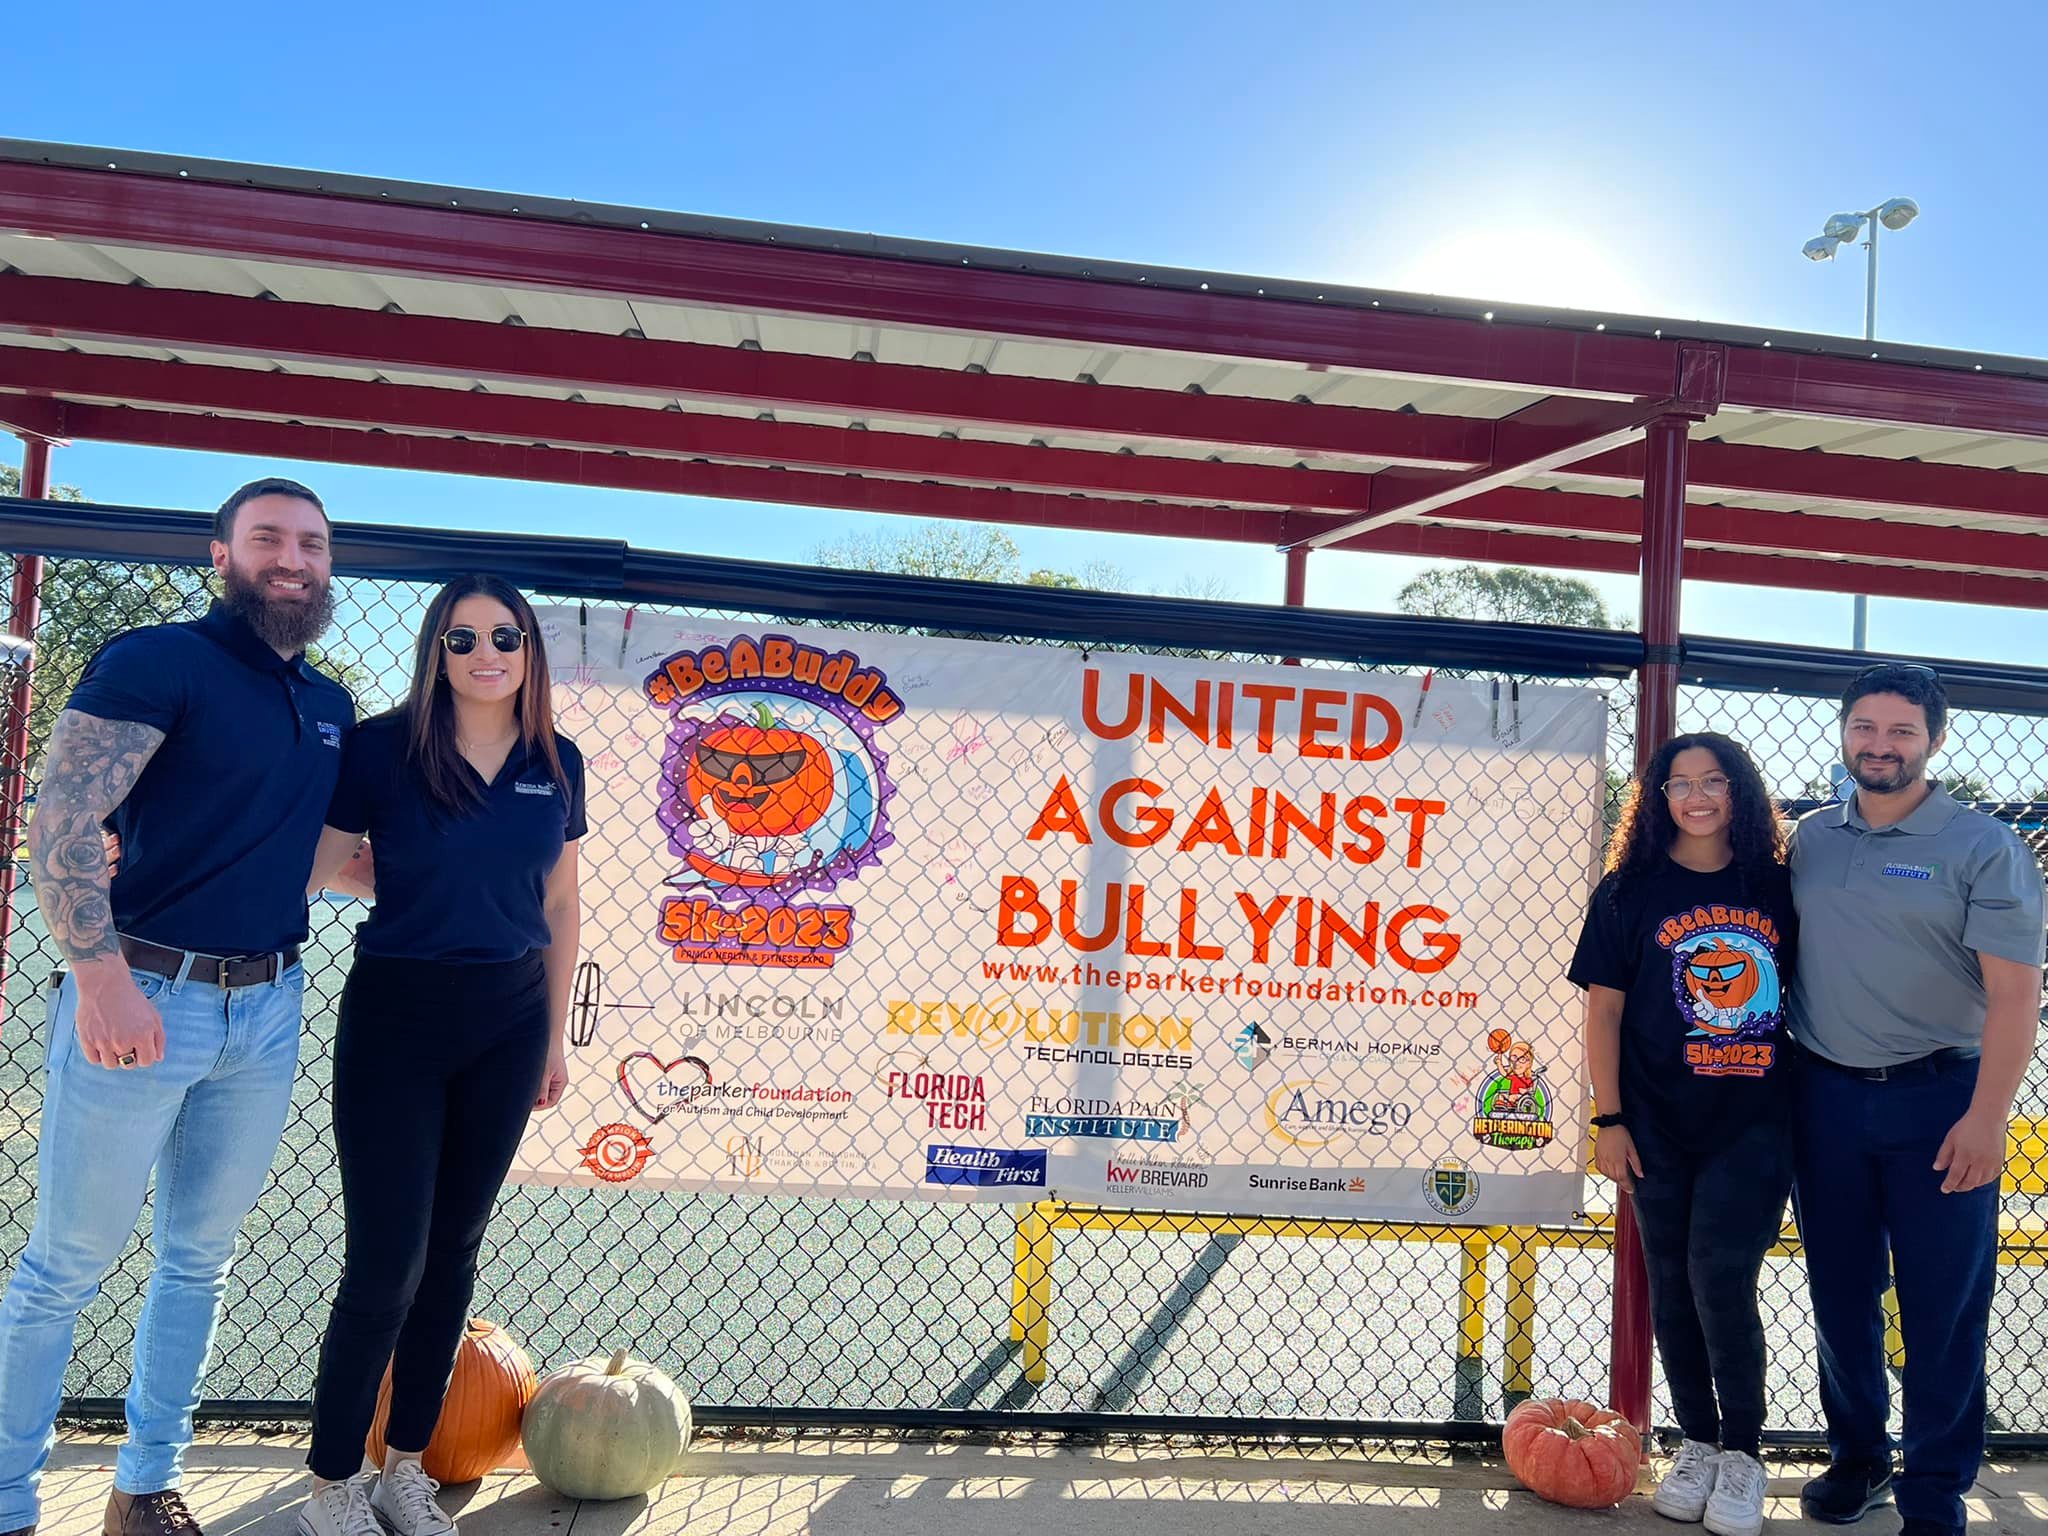 A pair of couples (one man and one woman) stand on either side of a banner hung on a chain link fence that says United Against Bullying. Three pumpkins are on the ground below.